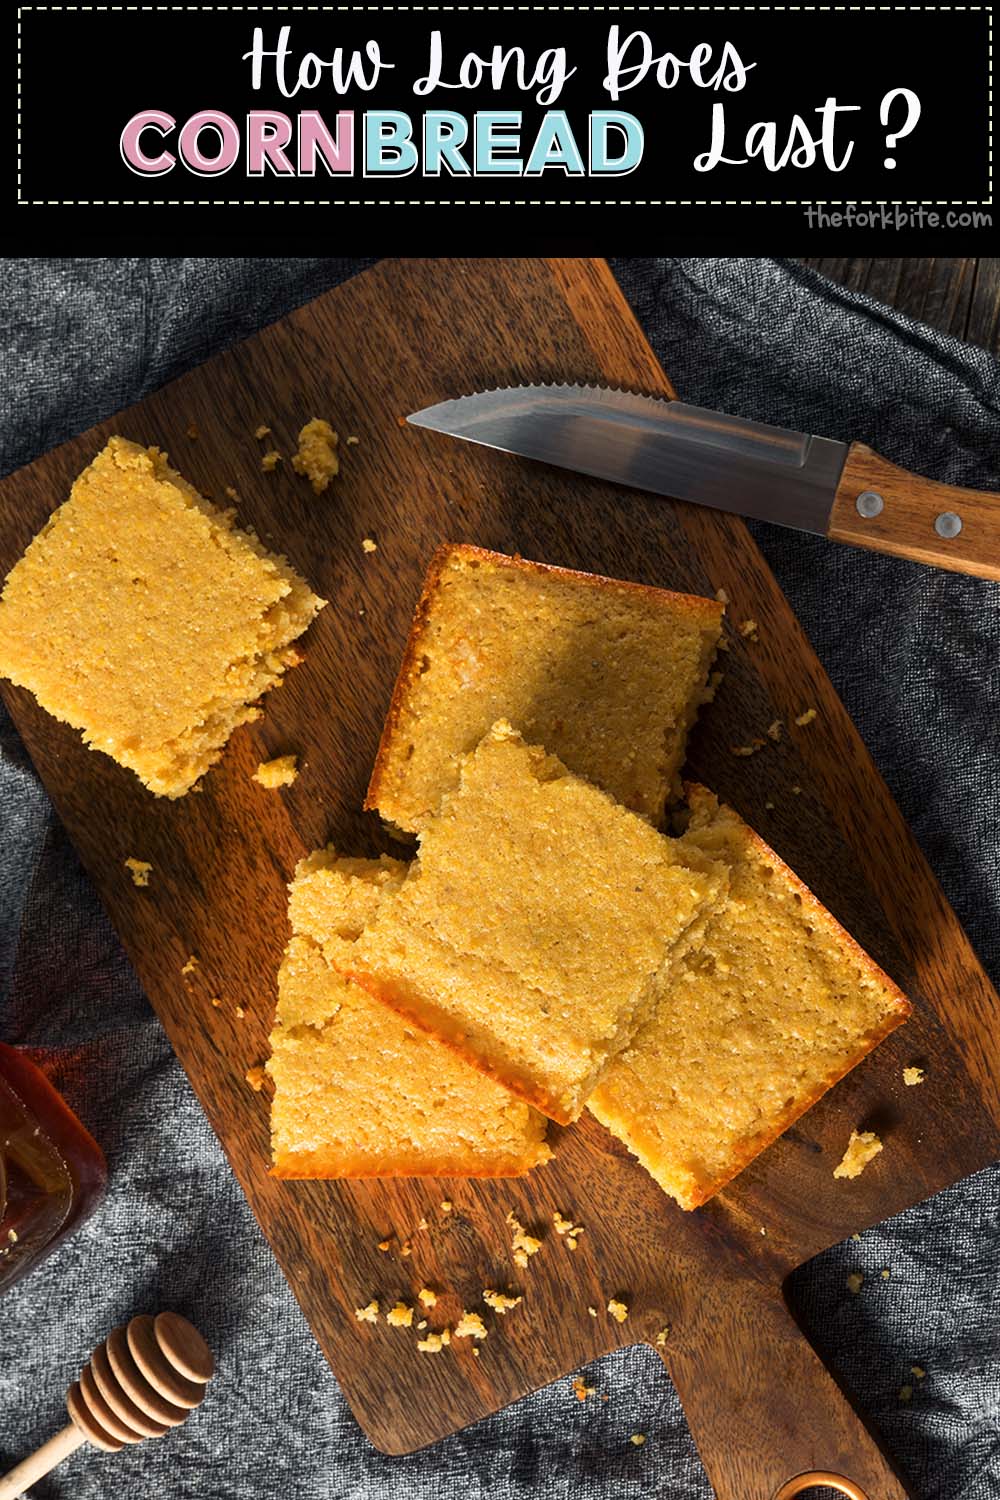 Normally, cornbread lasts around two days when left out. The best way to store cornbread is to cover it with cling wrap and place it in an airtight container before storing it in the fridge.